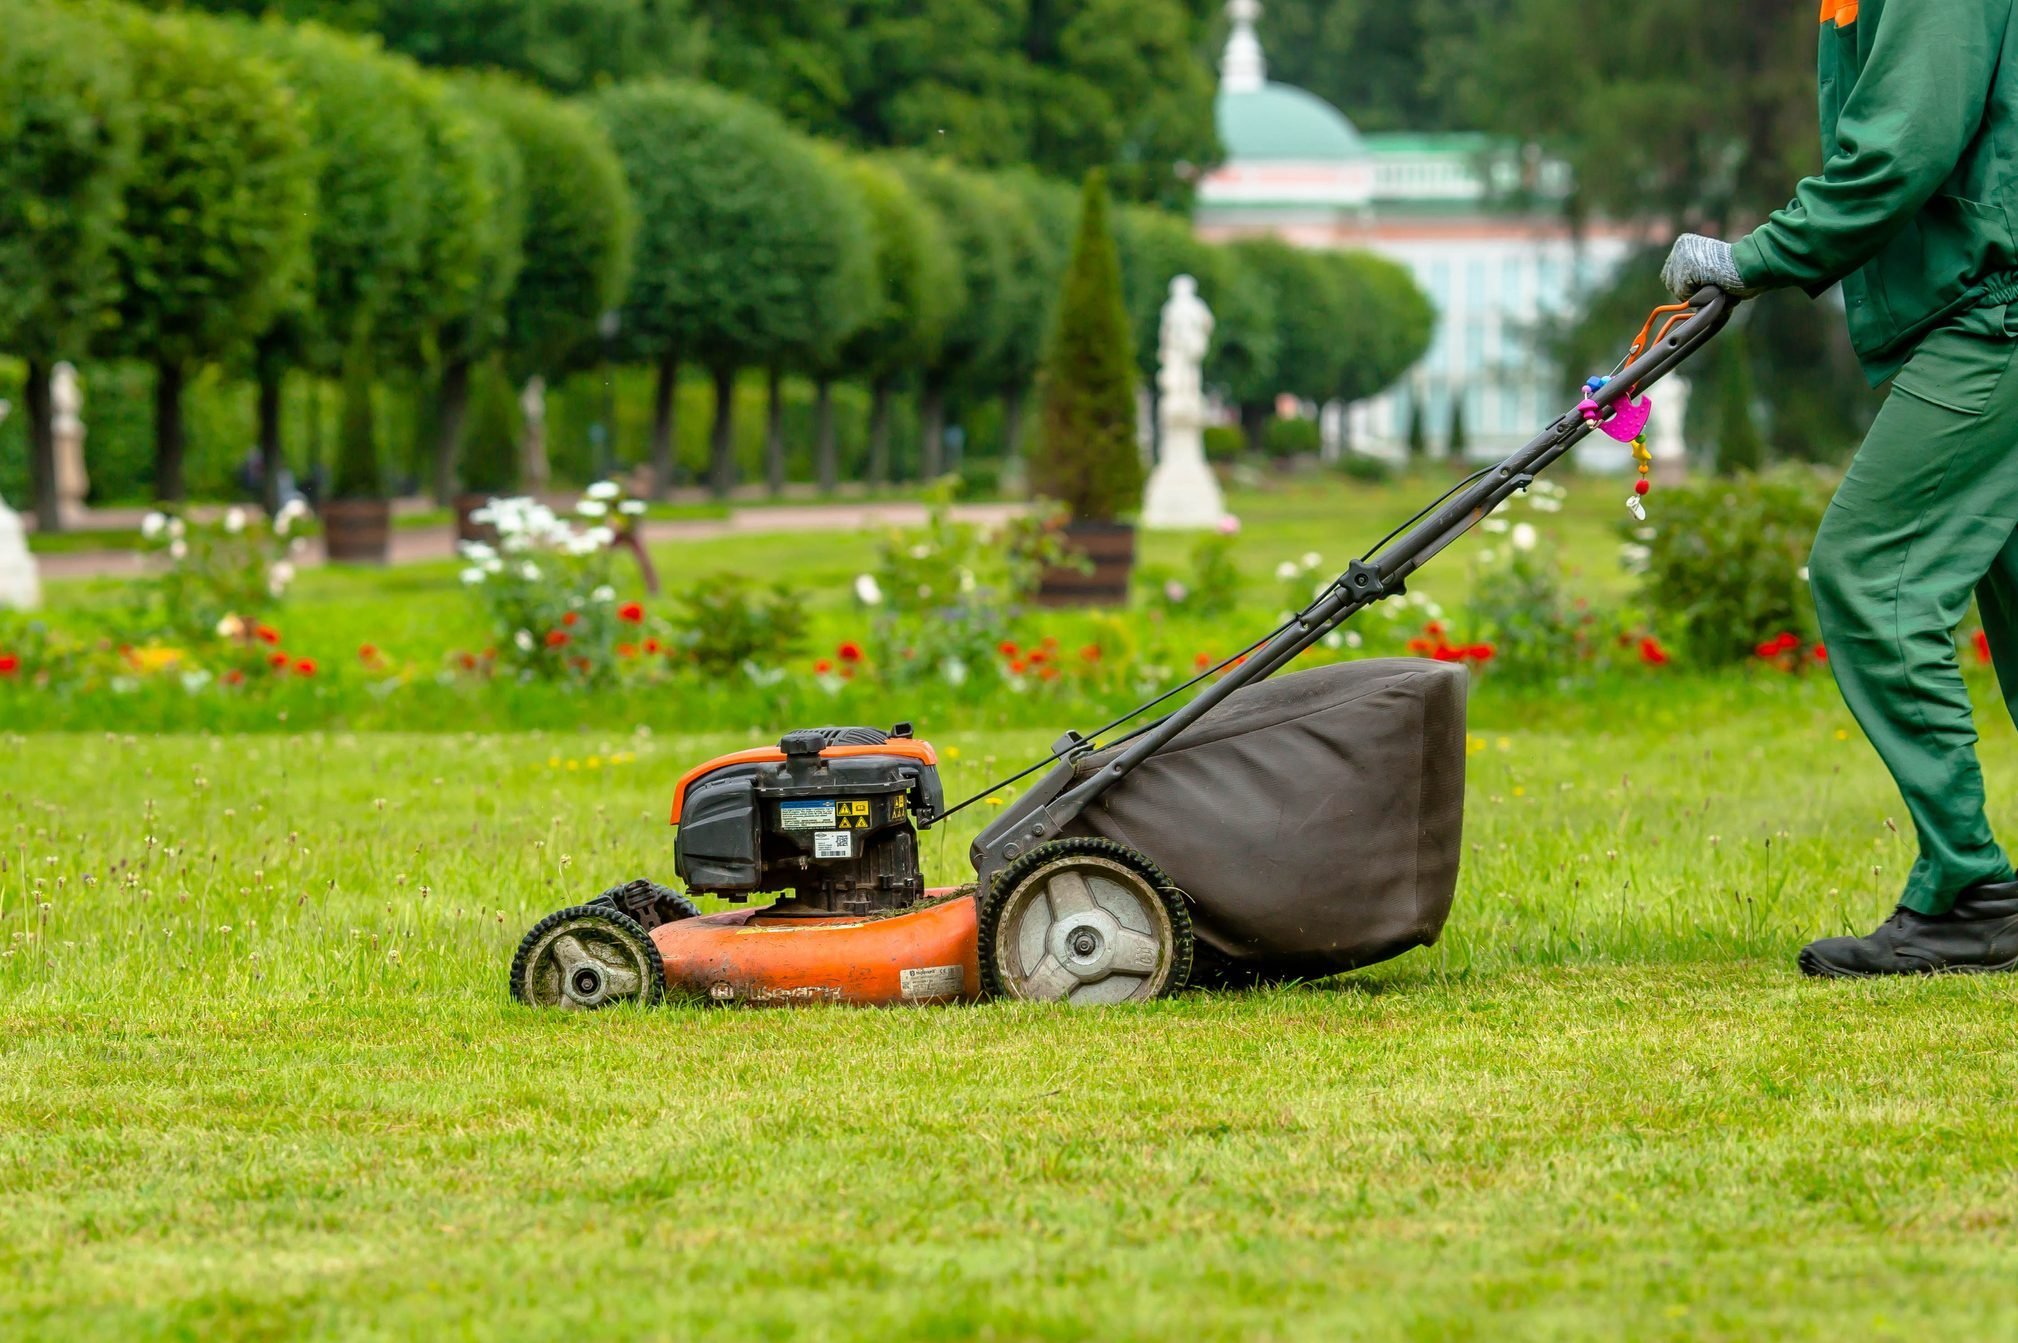 Push lawn mowers vs self-propelled lawn mowers - which is best?